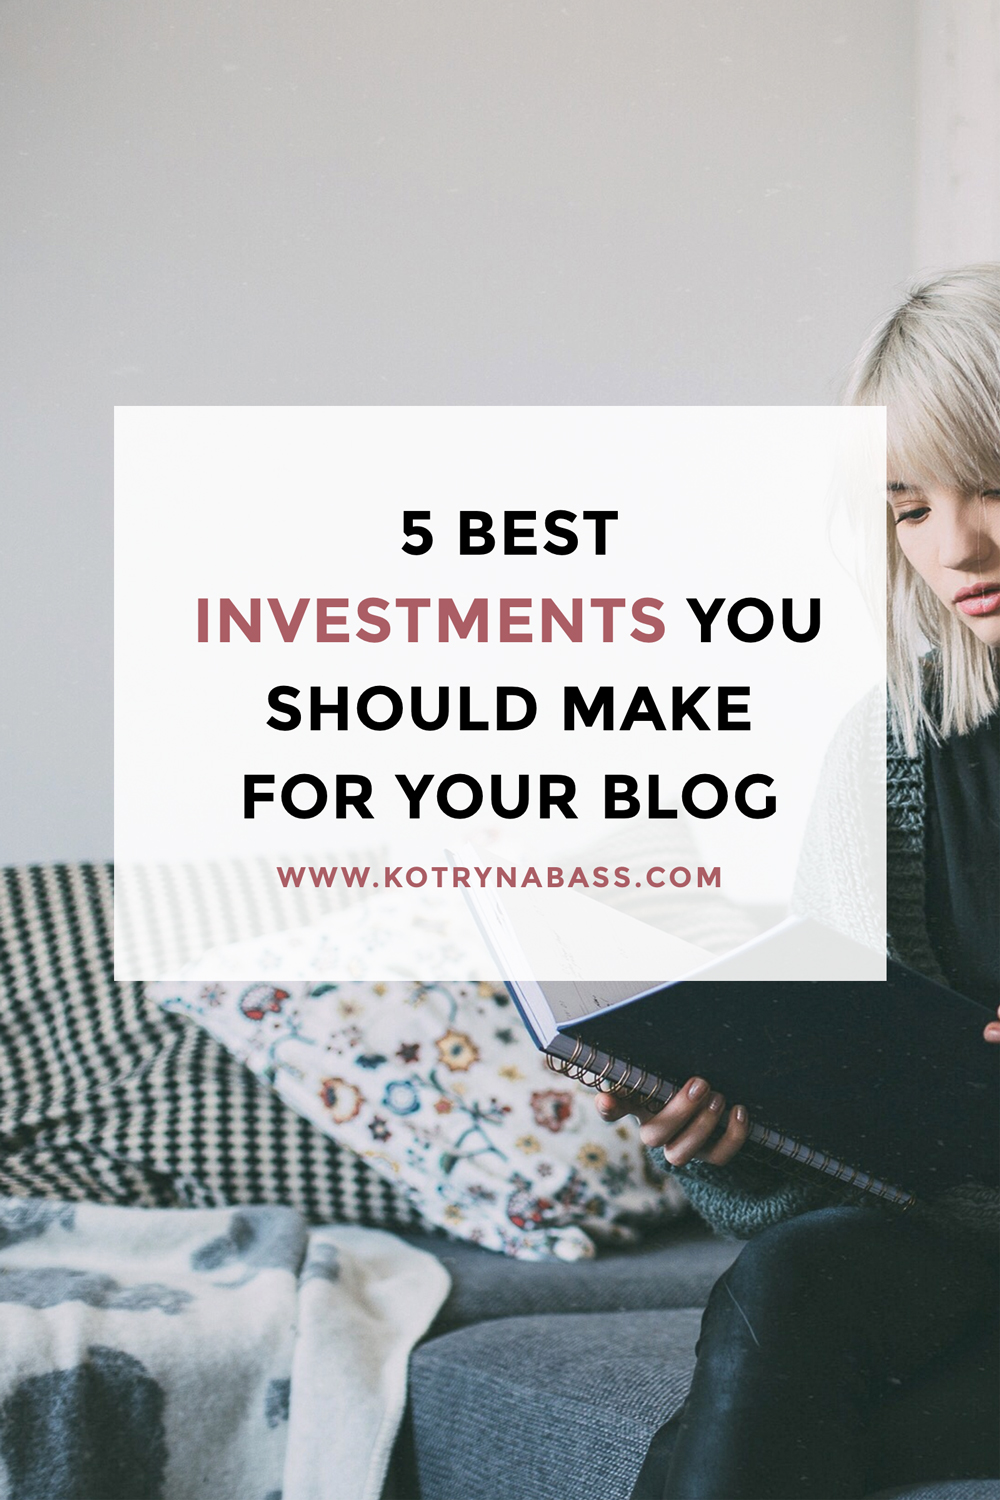 We all reach a point in blogging where in order to grow further, we have to be ready to make smaller or bigger expenses. Here are 5 investments every blogger should consider making.